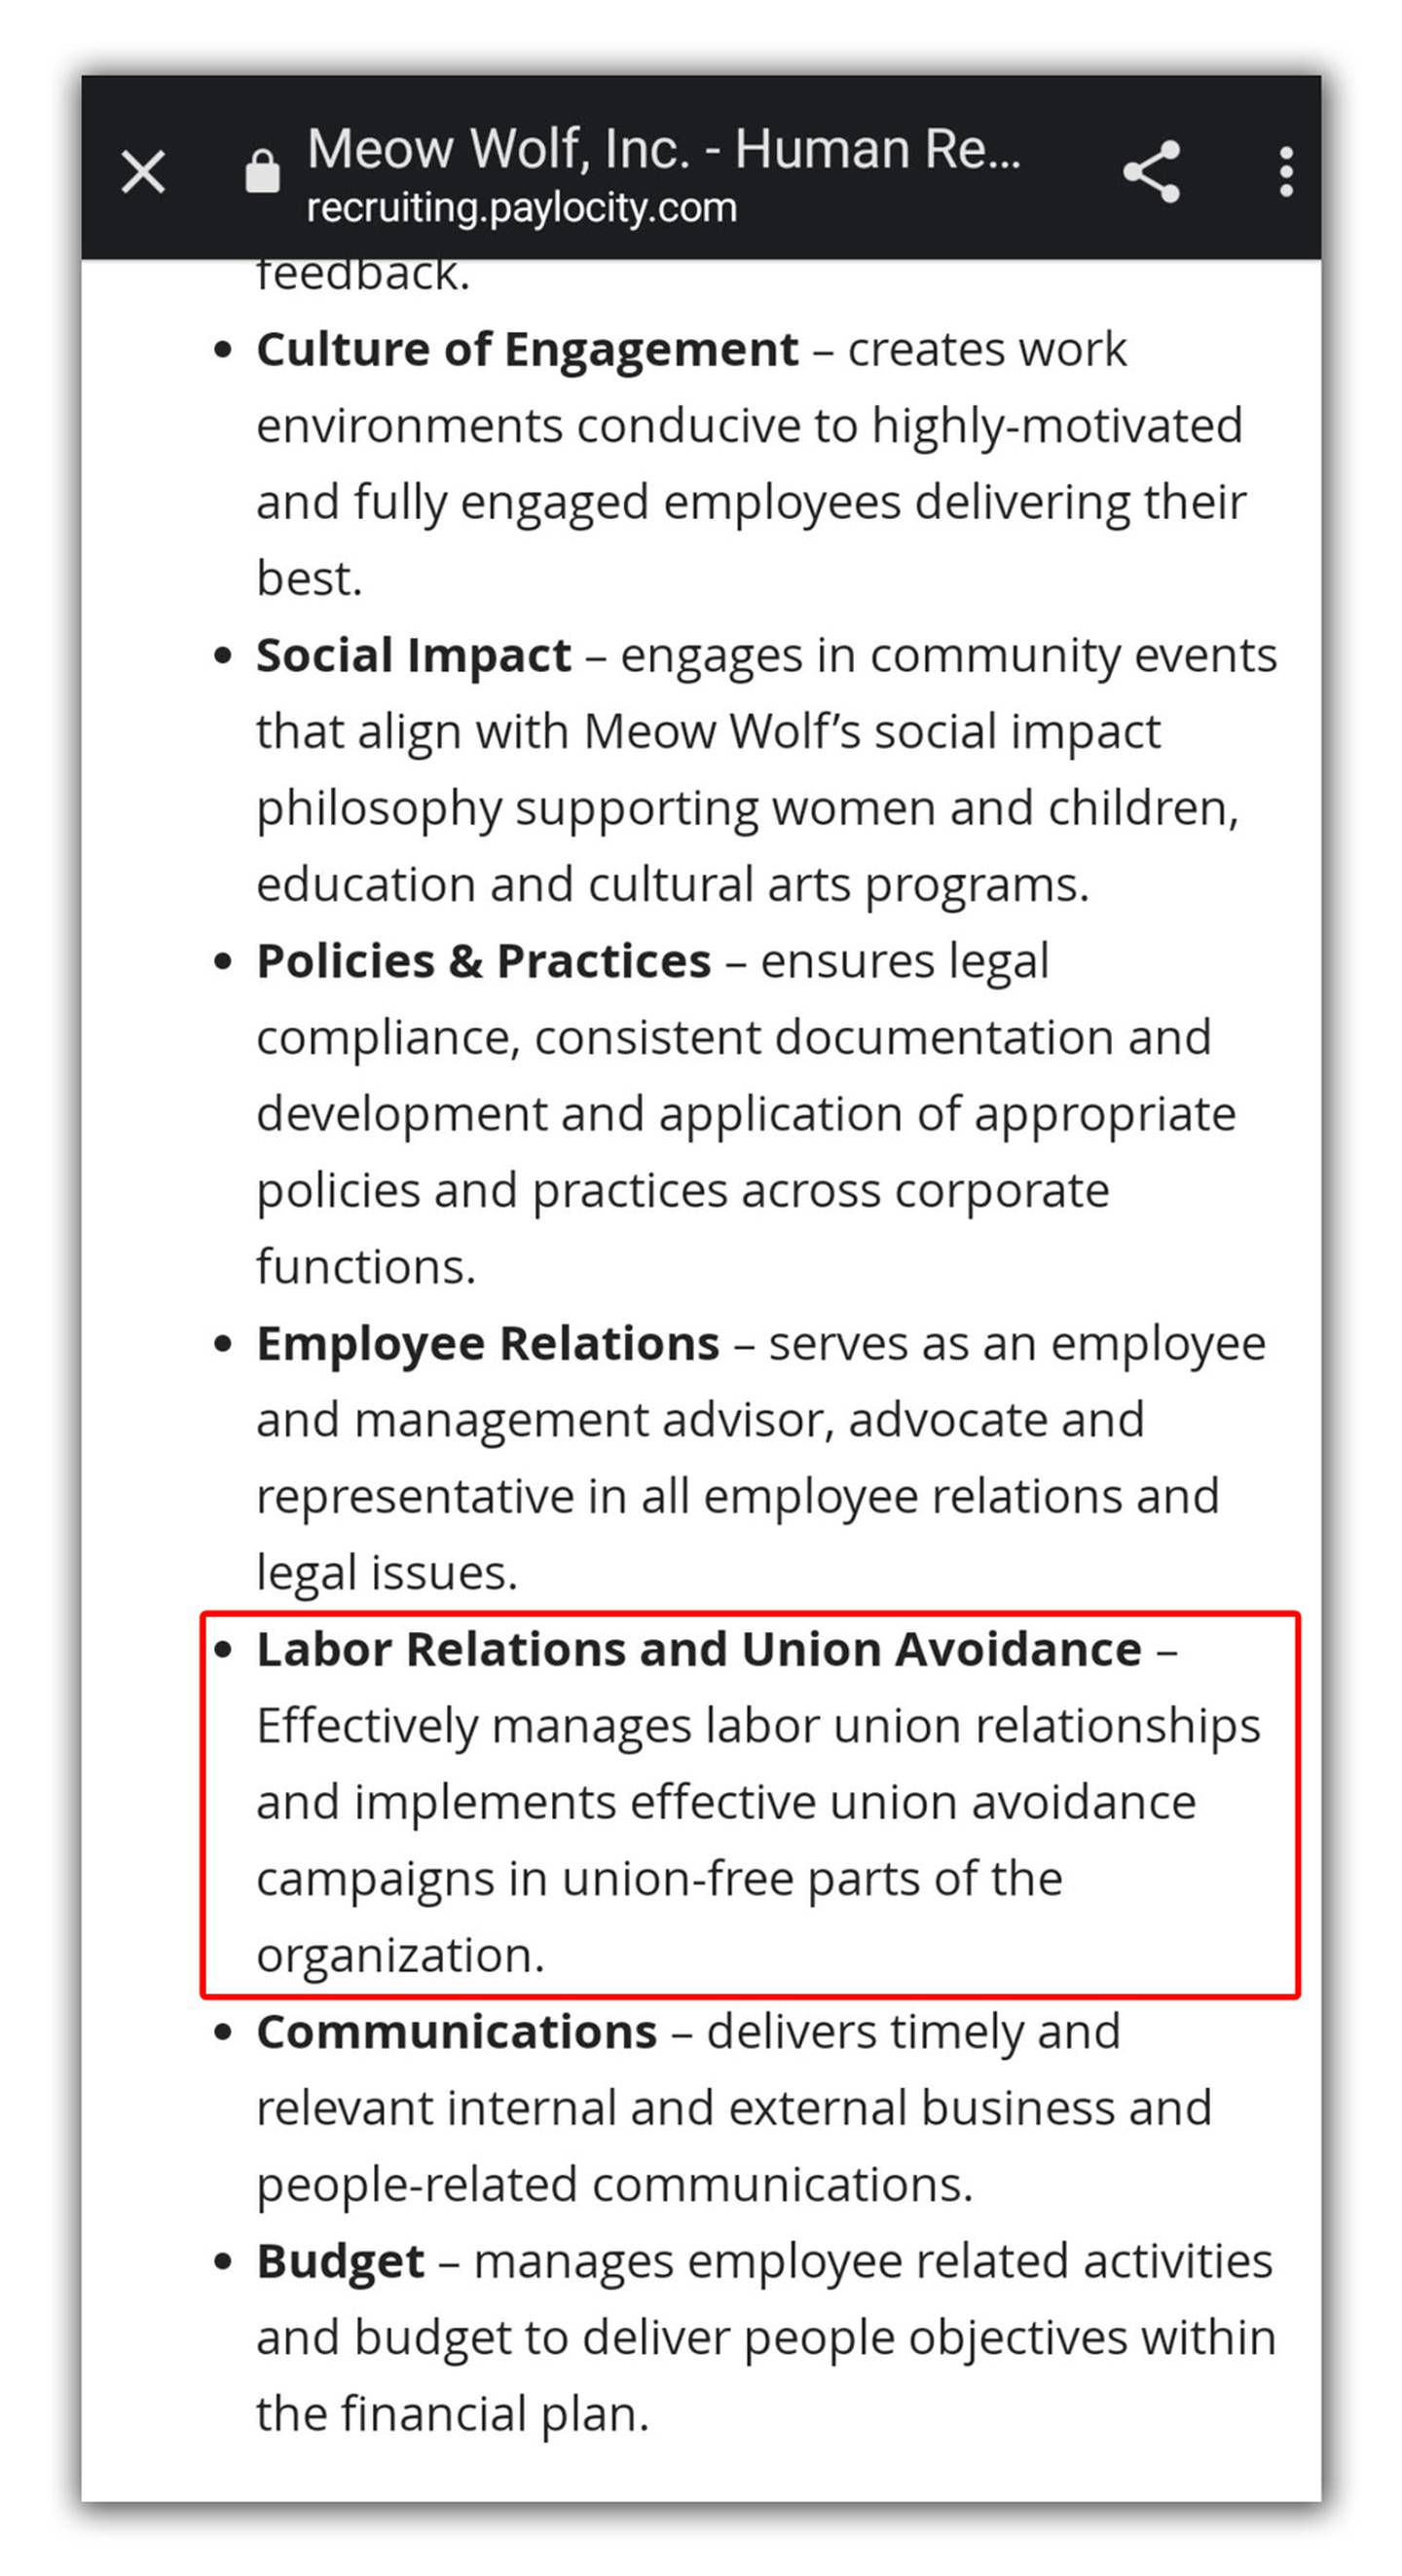 Screenshot of Meow Wolf job listing featuring various job responsibilities, including a provision which features a bullet point which says: "Labor Relations and Union Avoidance – Effectively manages labor union relationships and implements effective union avoidance campaigns in union-free parts of the organization."